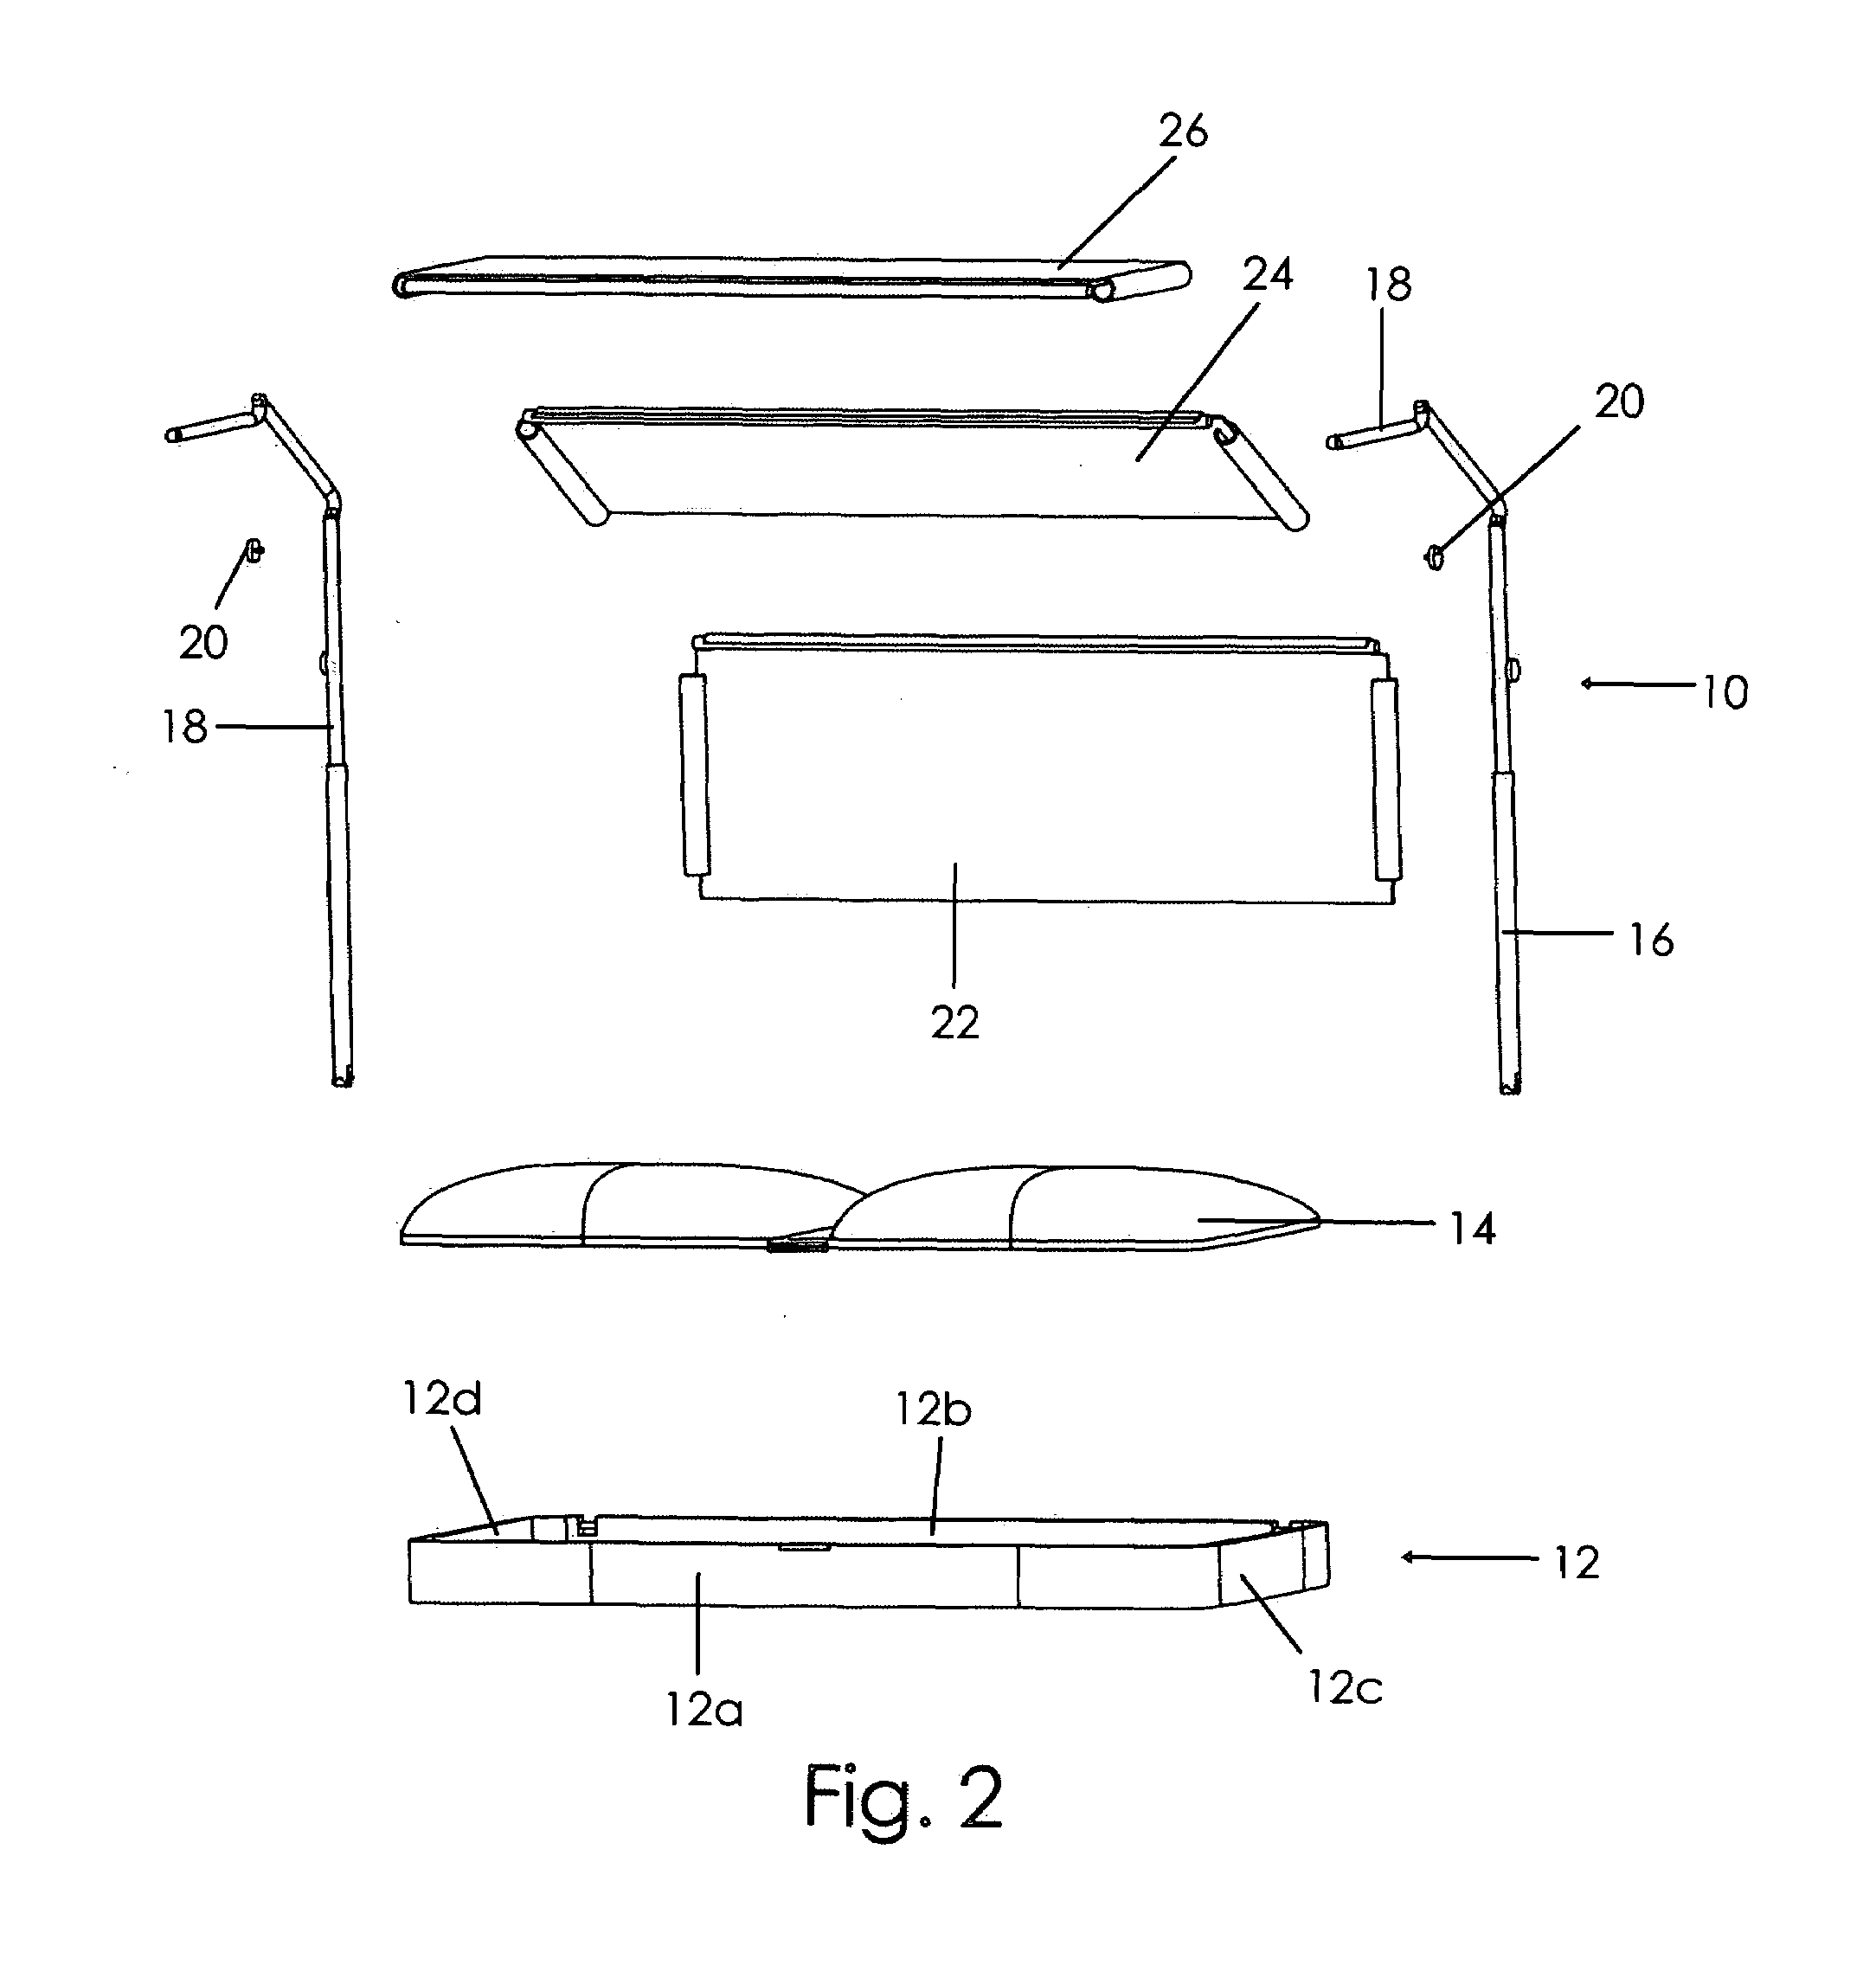 Portable covered seating apparatus